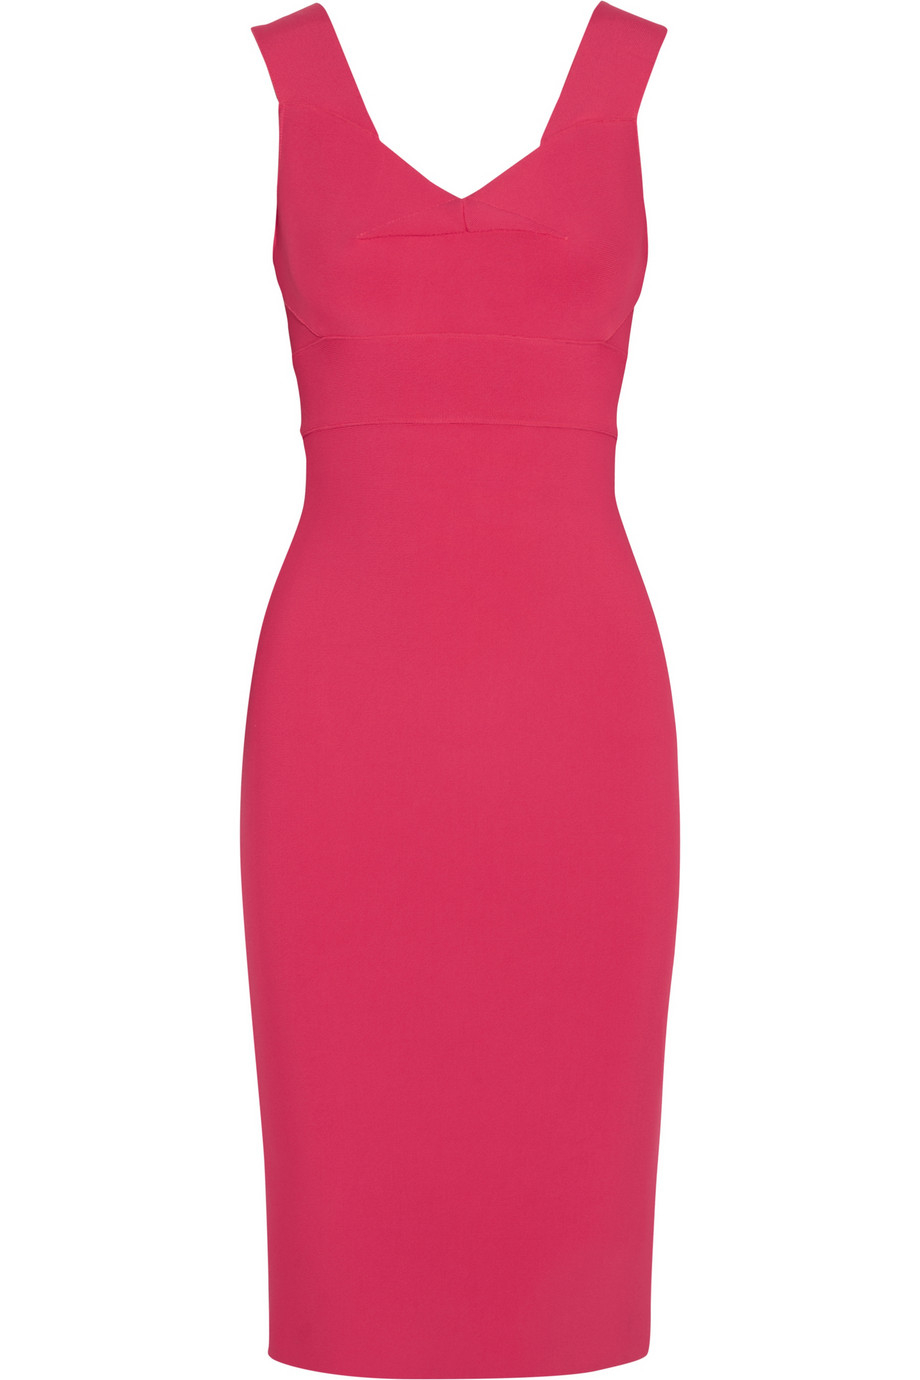 Roland Mouret Ermelo Stretchjersey Dress in Pink (Bright pink) | Lyst